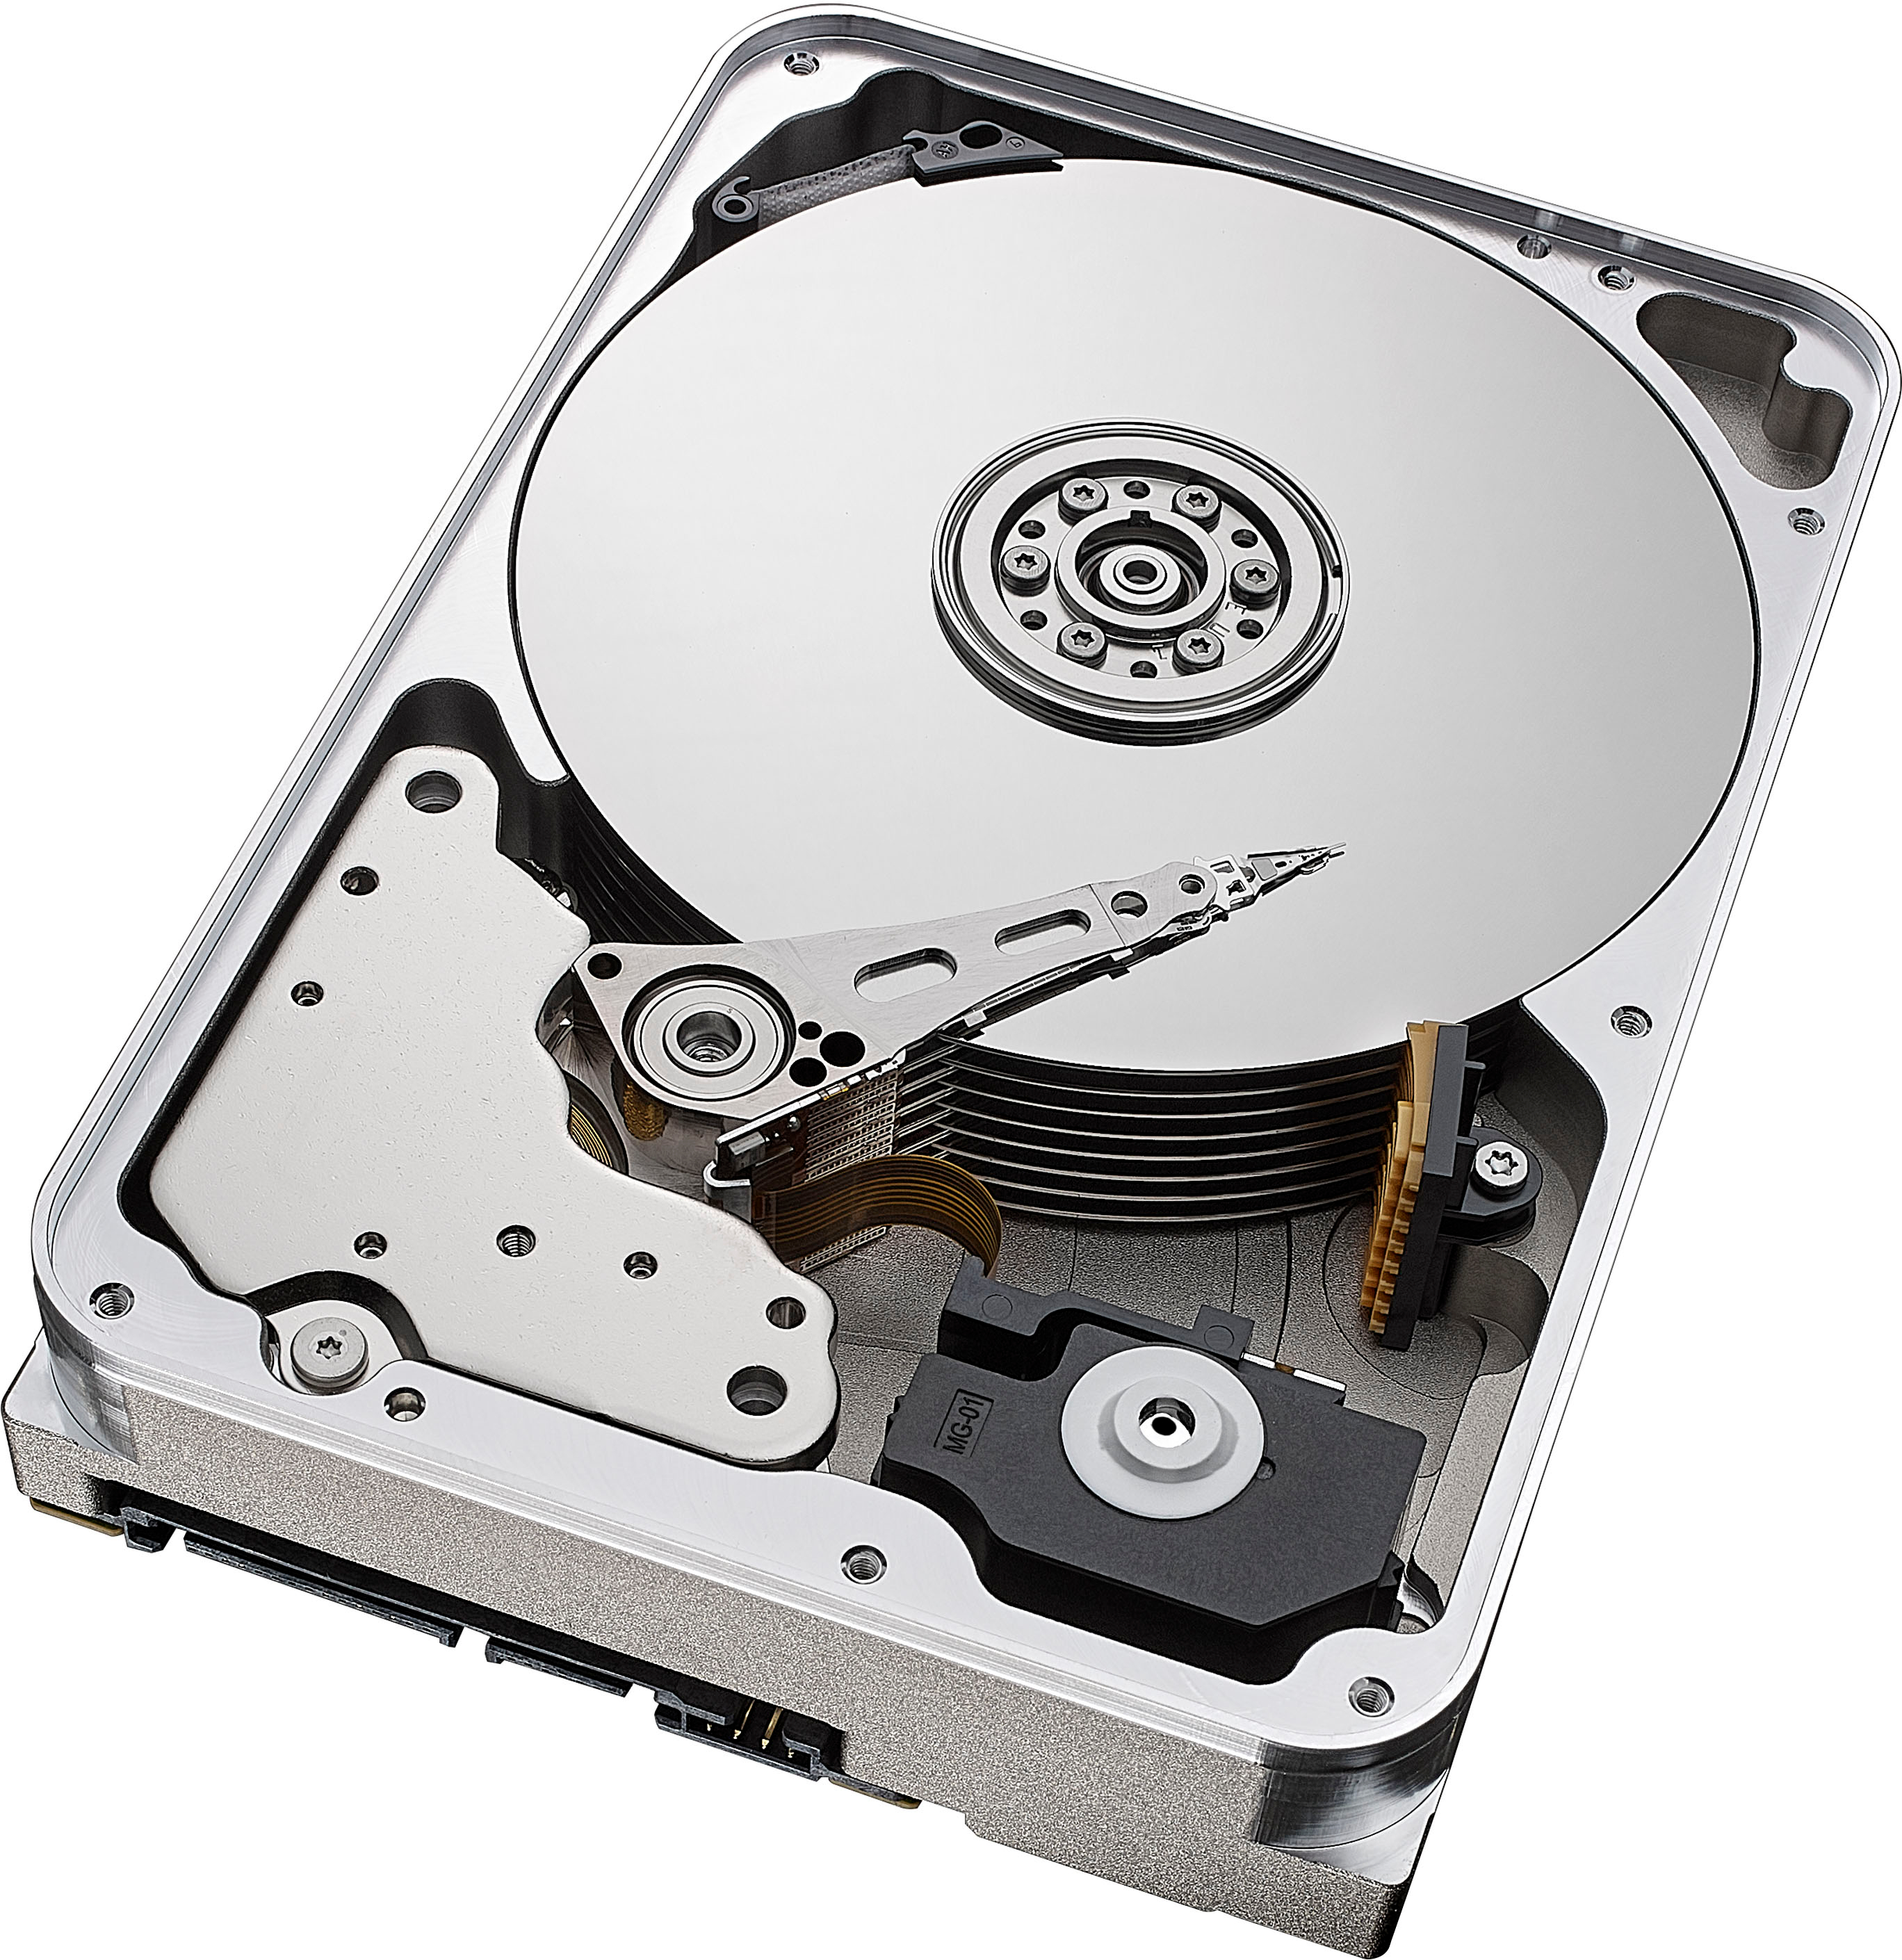 Get this Seagate IronWolf 12TB NAS hard drive for its all-time low price of  $189.99 - Neowin